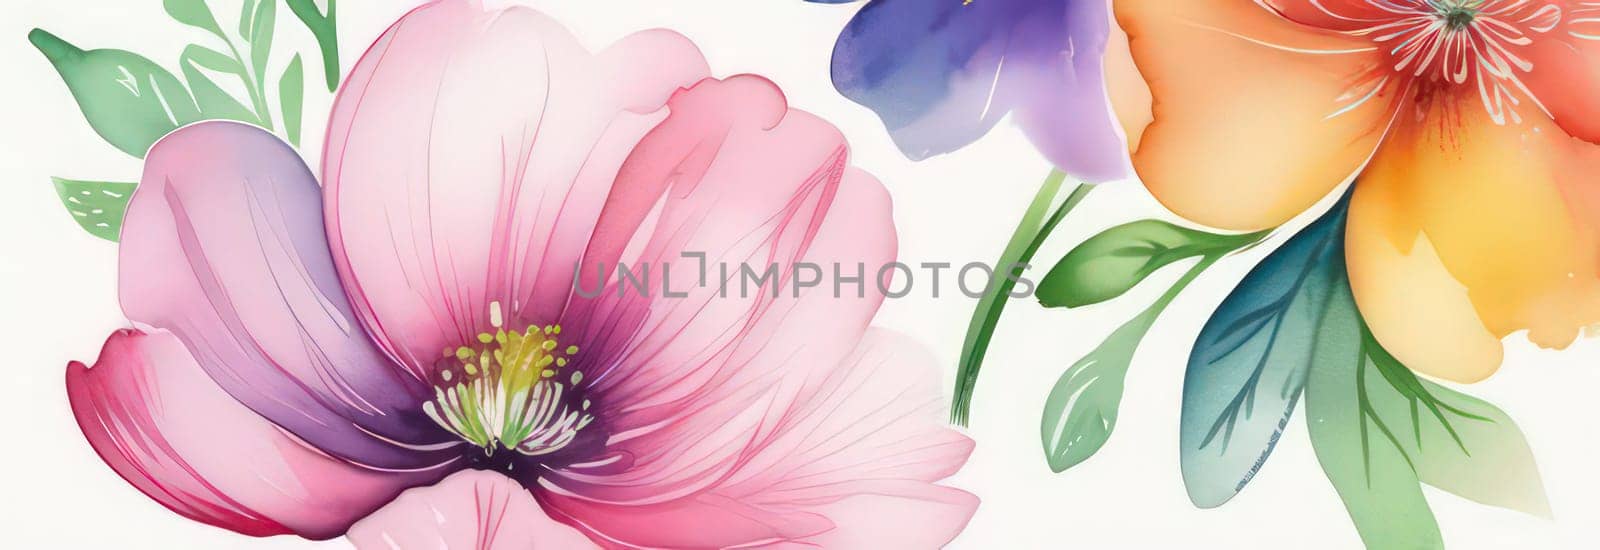 Beautiful celebration spring flowers on pastel background. Concept Birthday, Mothers Day, Womens Day, March 8. Spring easter flower background. Spring, easter greeting card design layout. Copy space. by Angelsmoon